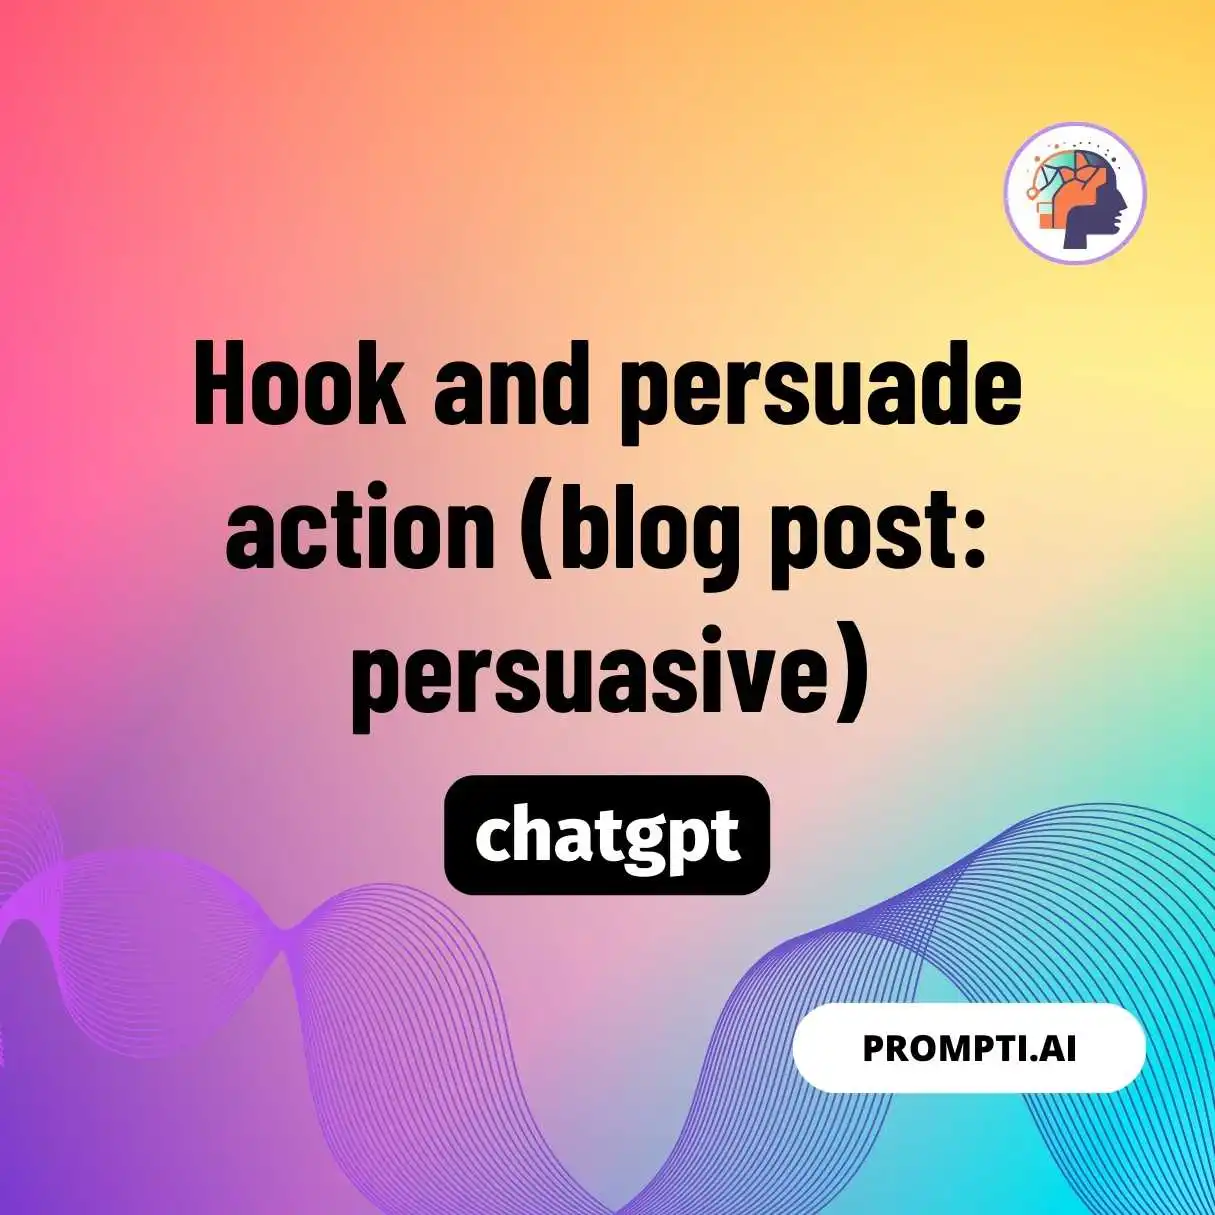 Hook and persuade action (blog post: persuasive)